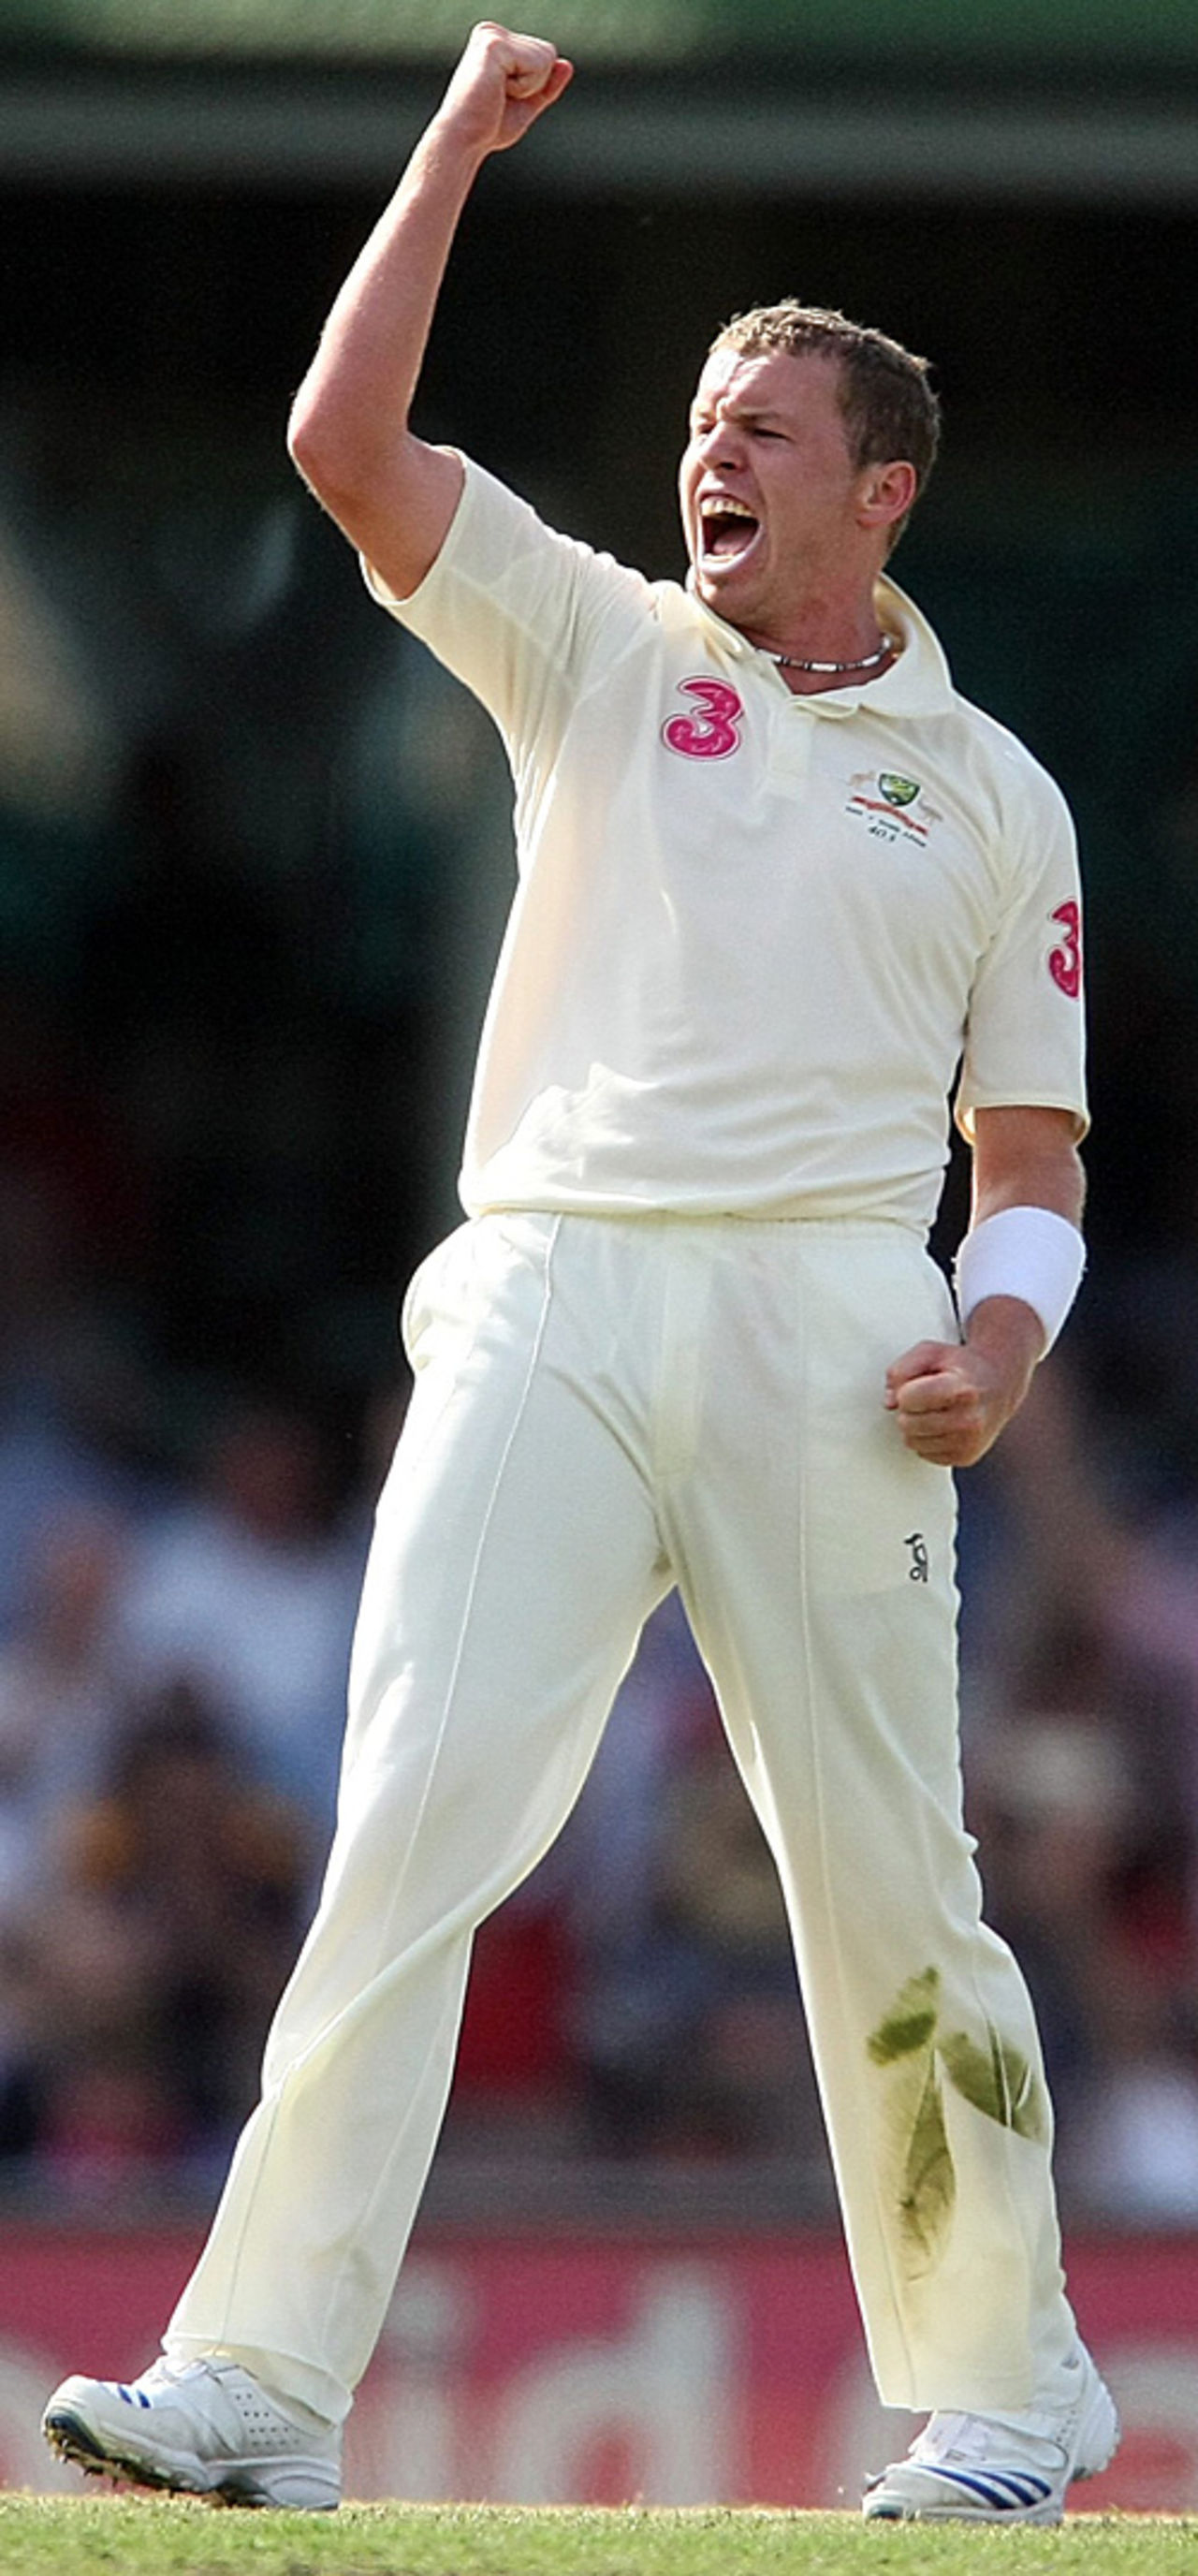 Peter Siddle celebrates another wicket on his way to five, Australia v South Africa, 3rd Test, 3rd day, Sydney, January 5, 2009